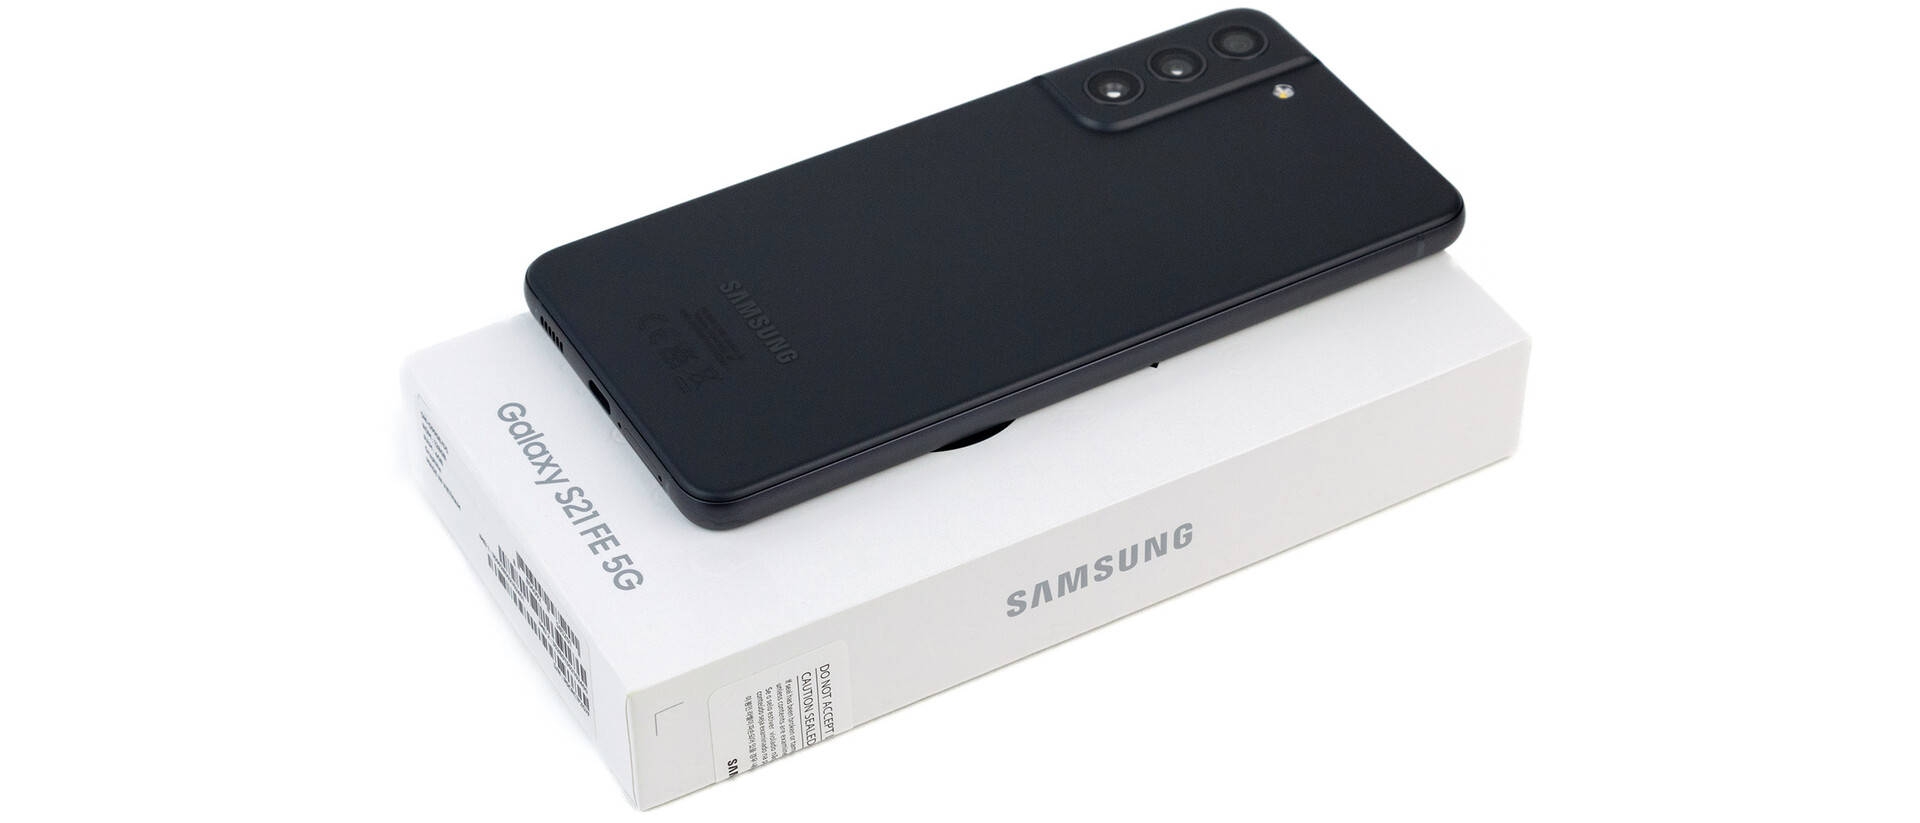 The Samsung Galaxy S21 FE is here and we're starting a fan club